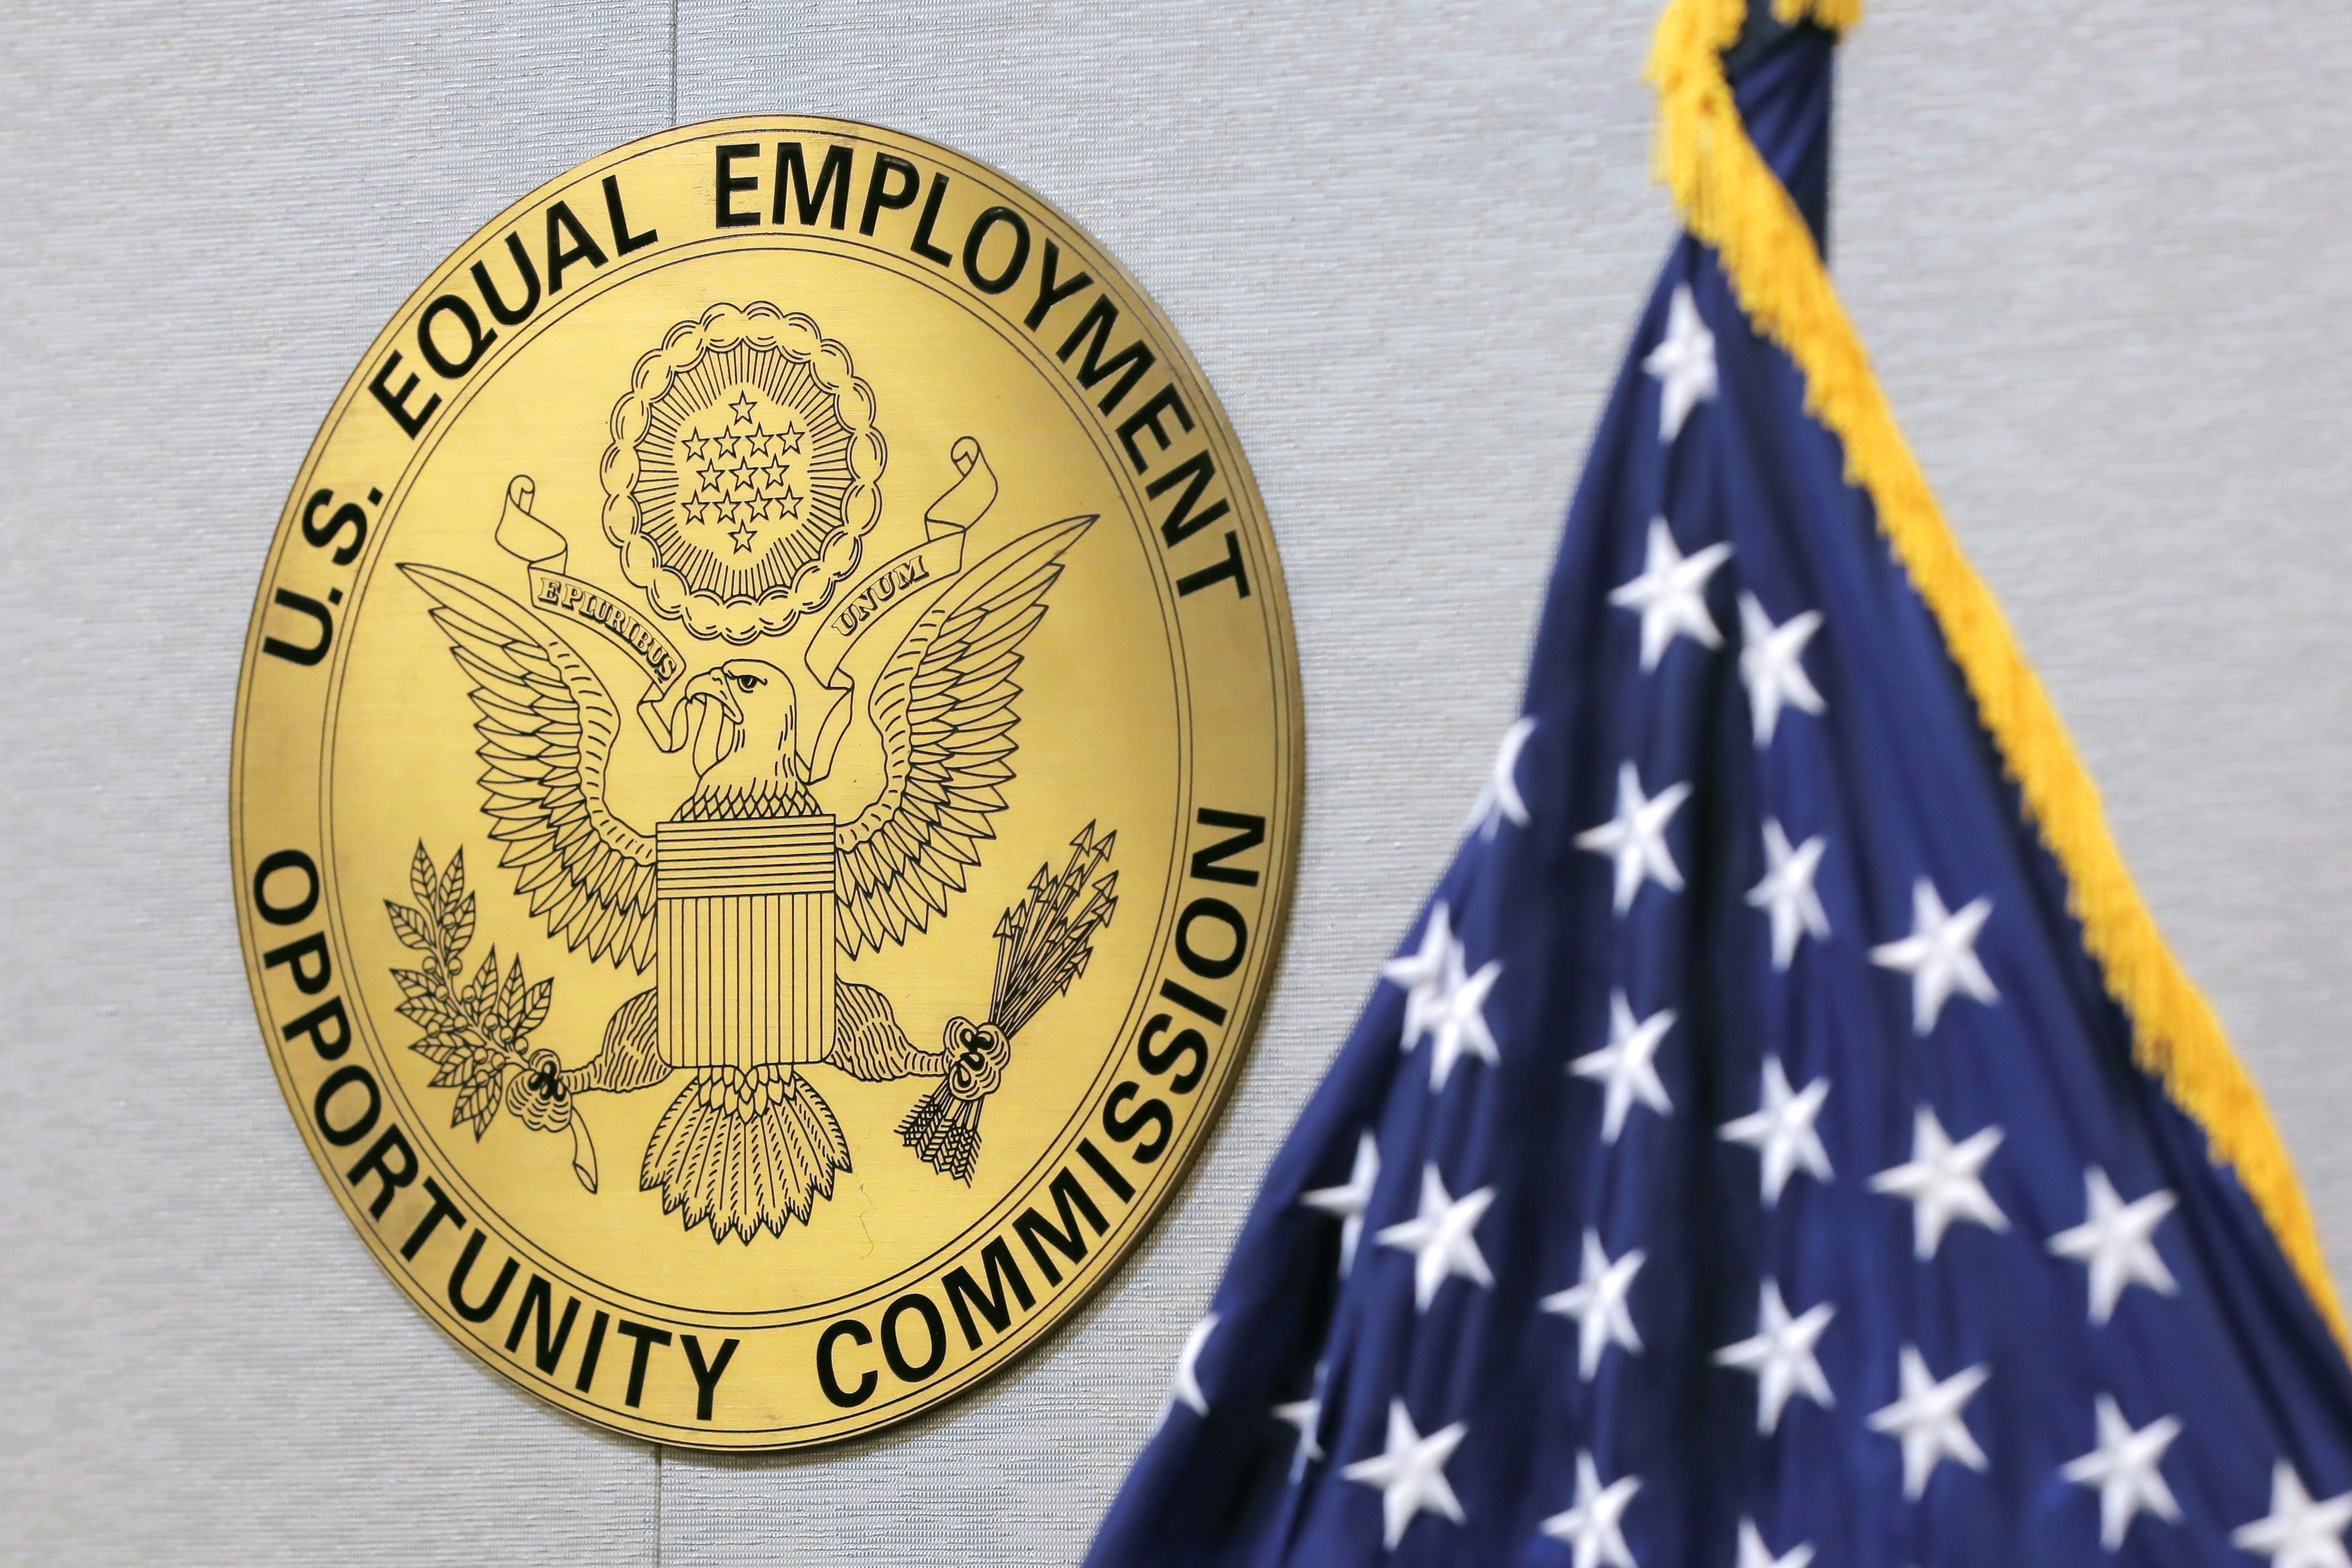 The seal of the The United States Equal Employment Opportunity Commission (EEOC) is seen at their headquarters in Washington, D.C., U.S., May 14, 2021. REUTERS/Andrew Kelly